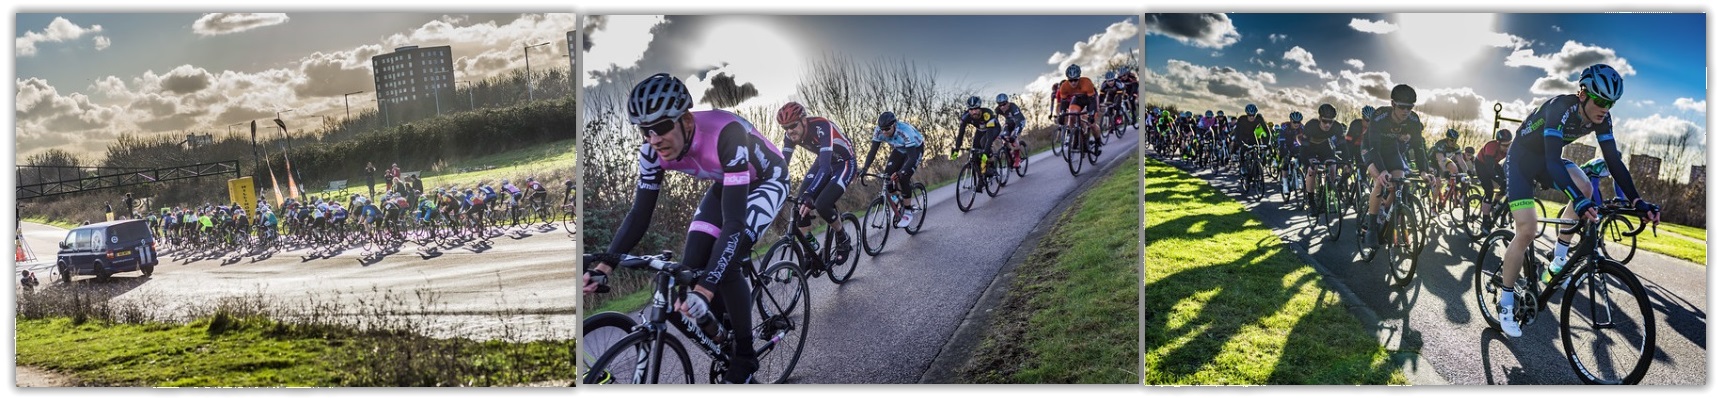 Imperial Winter Series 2016/2017 Hillingdon Cycle Circuit